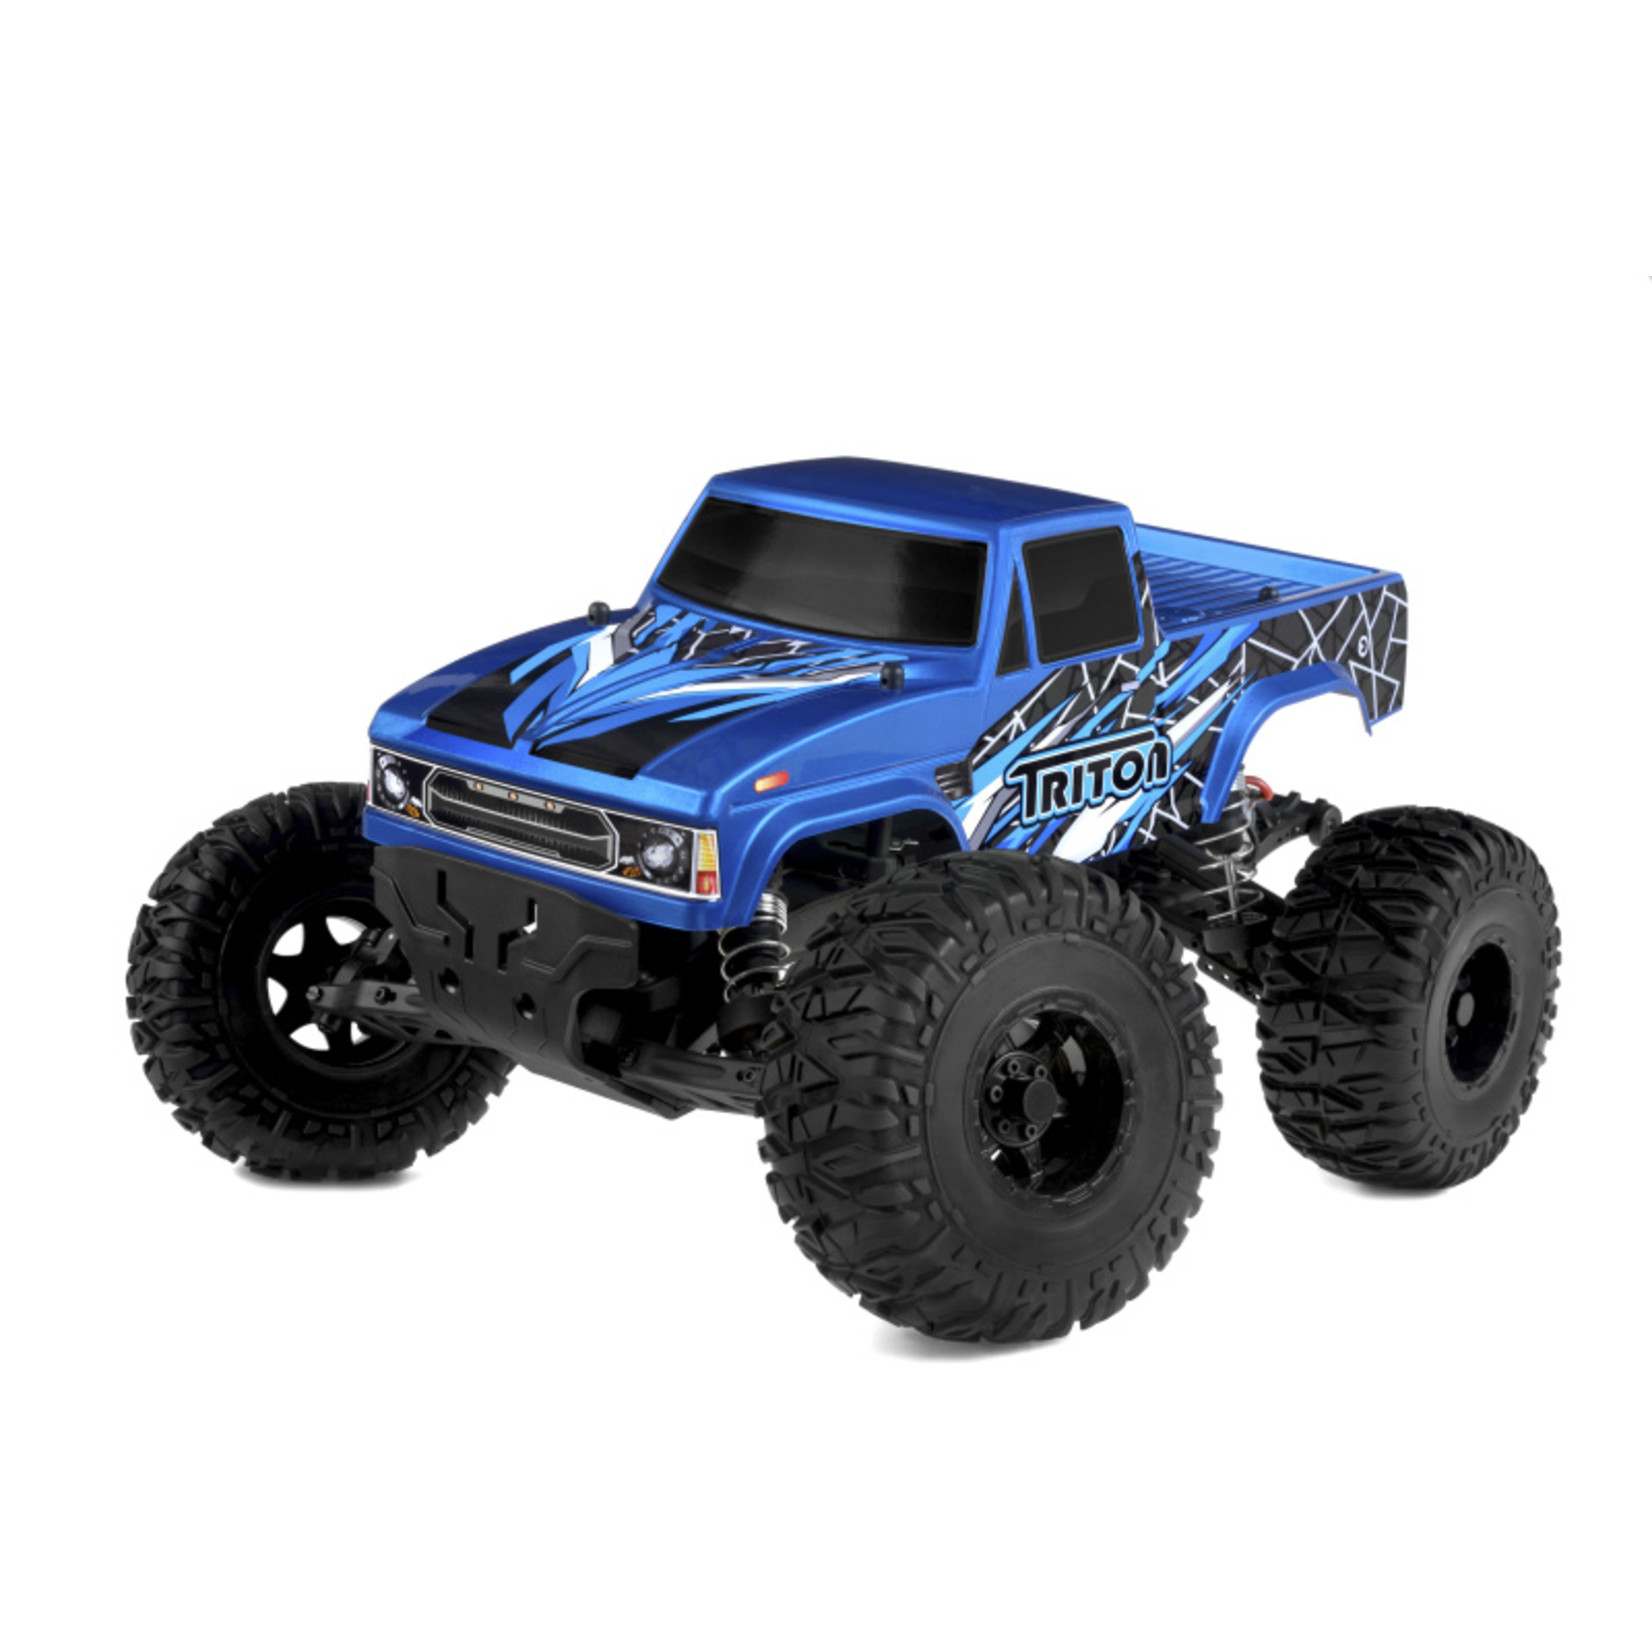 Corally (Team Corally) 1/10 Triton SP 2WD Monster Truck Brushed RTR (No Battery